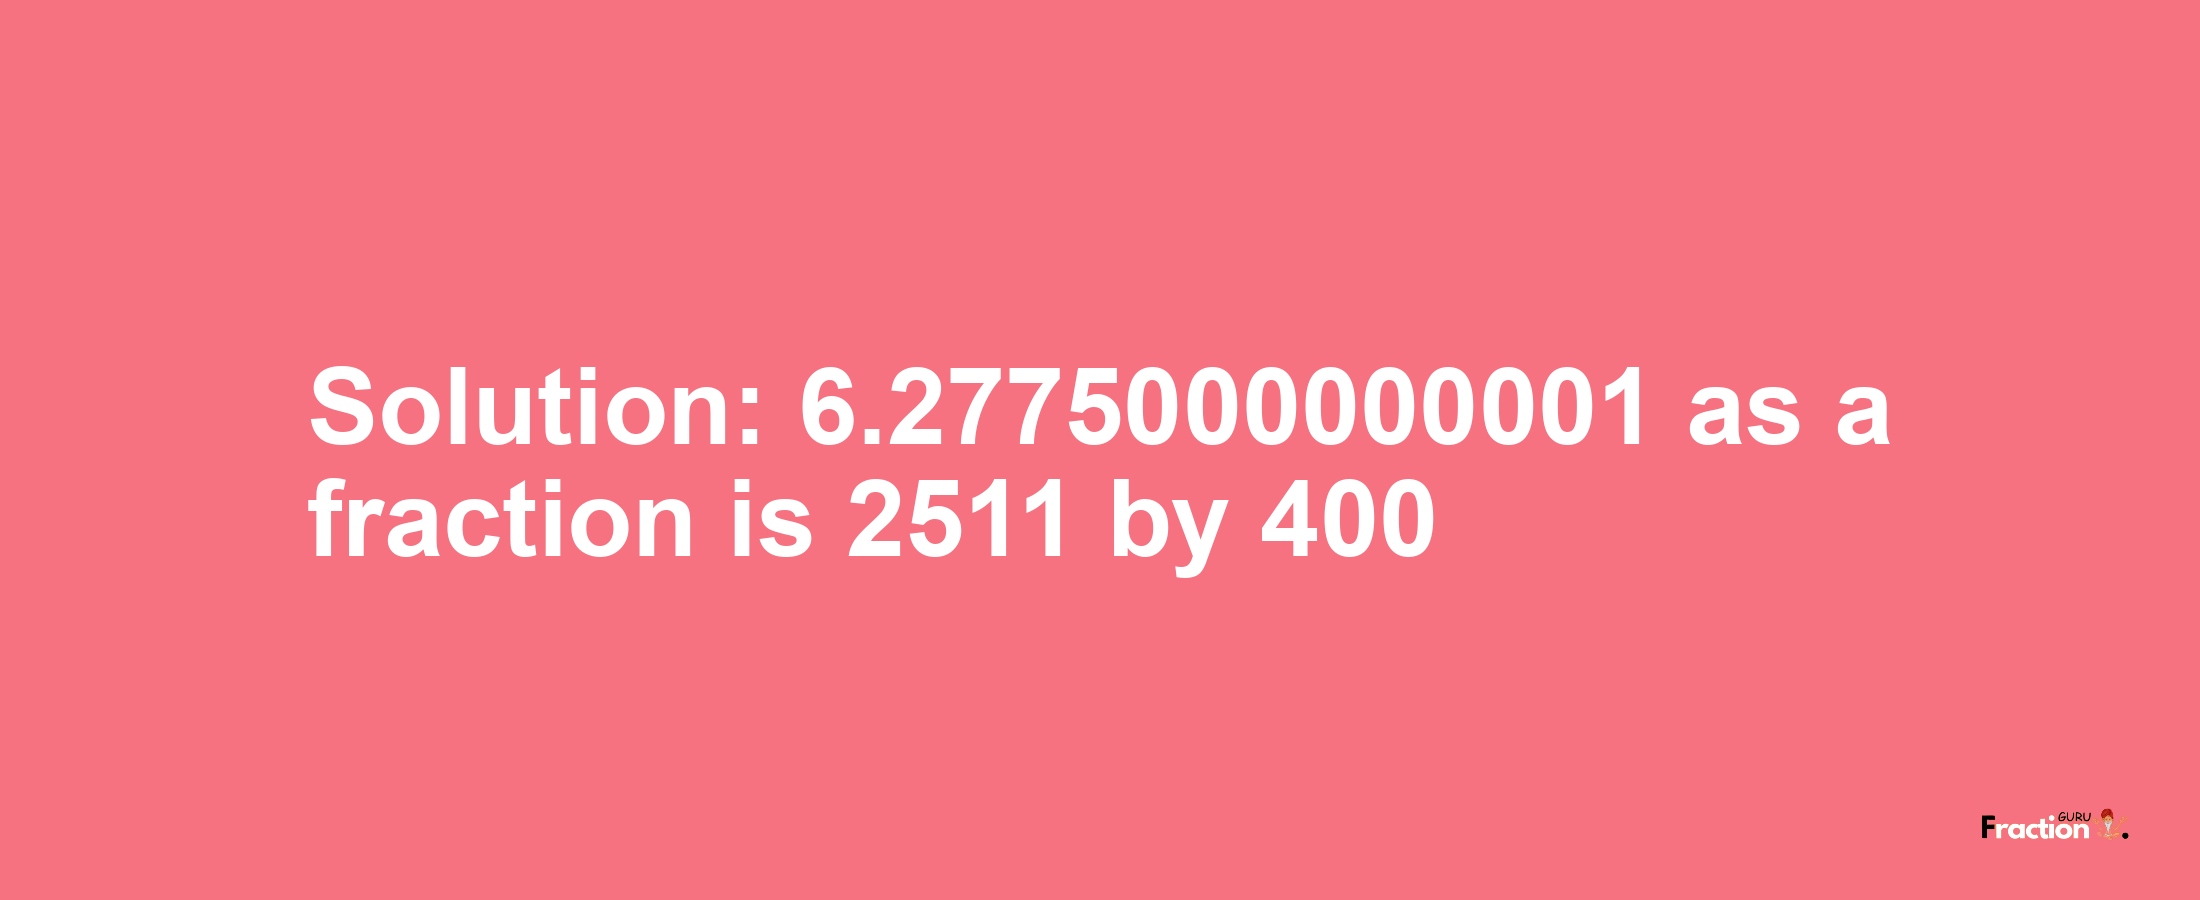 Solution:6.2775000000001 as a fraction is 2511/400